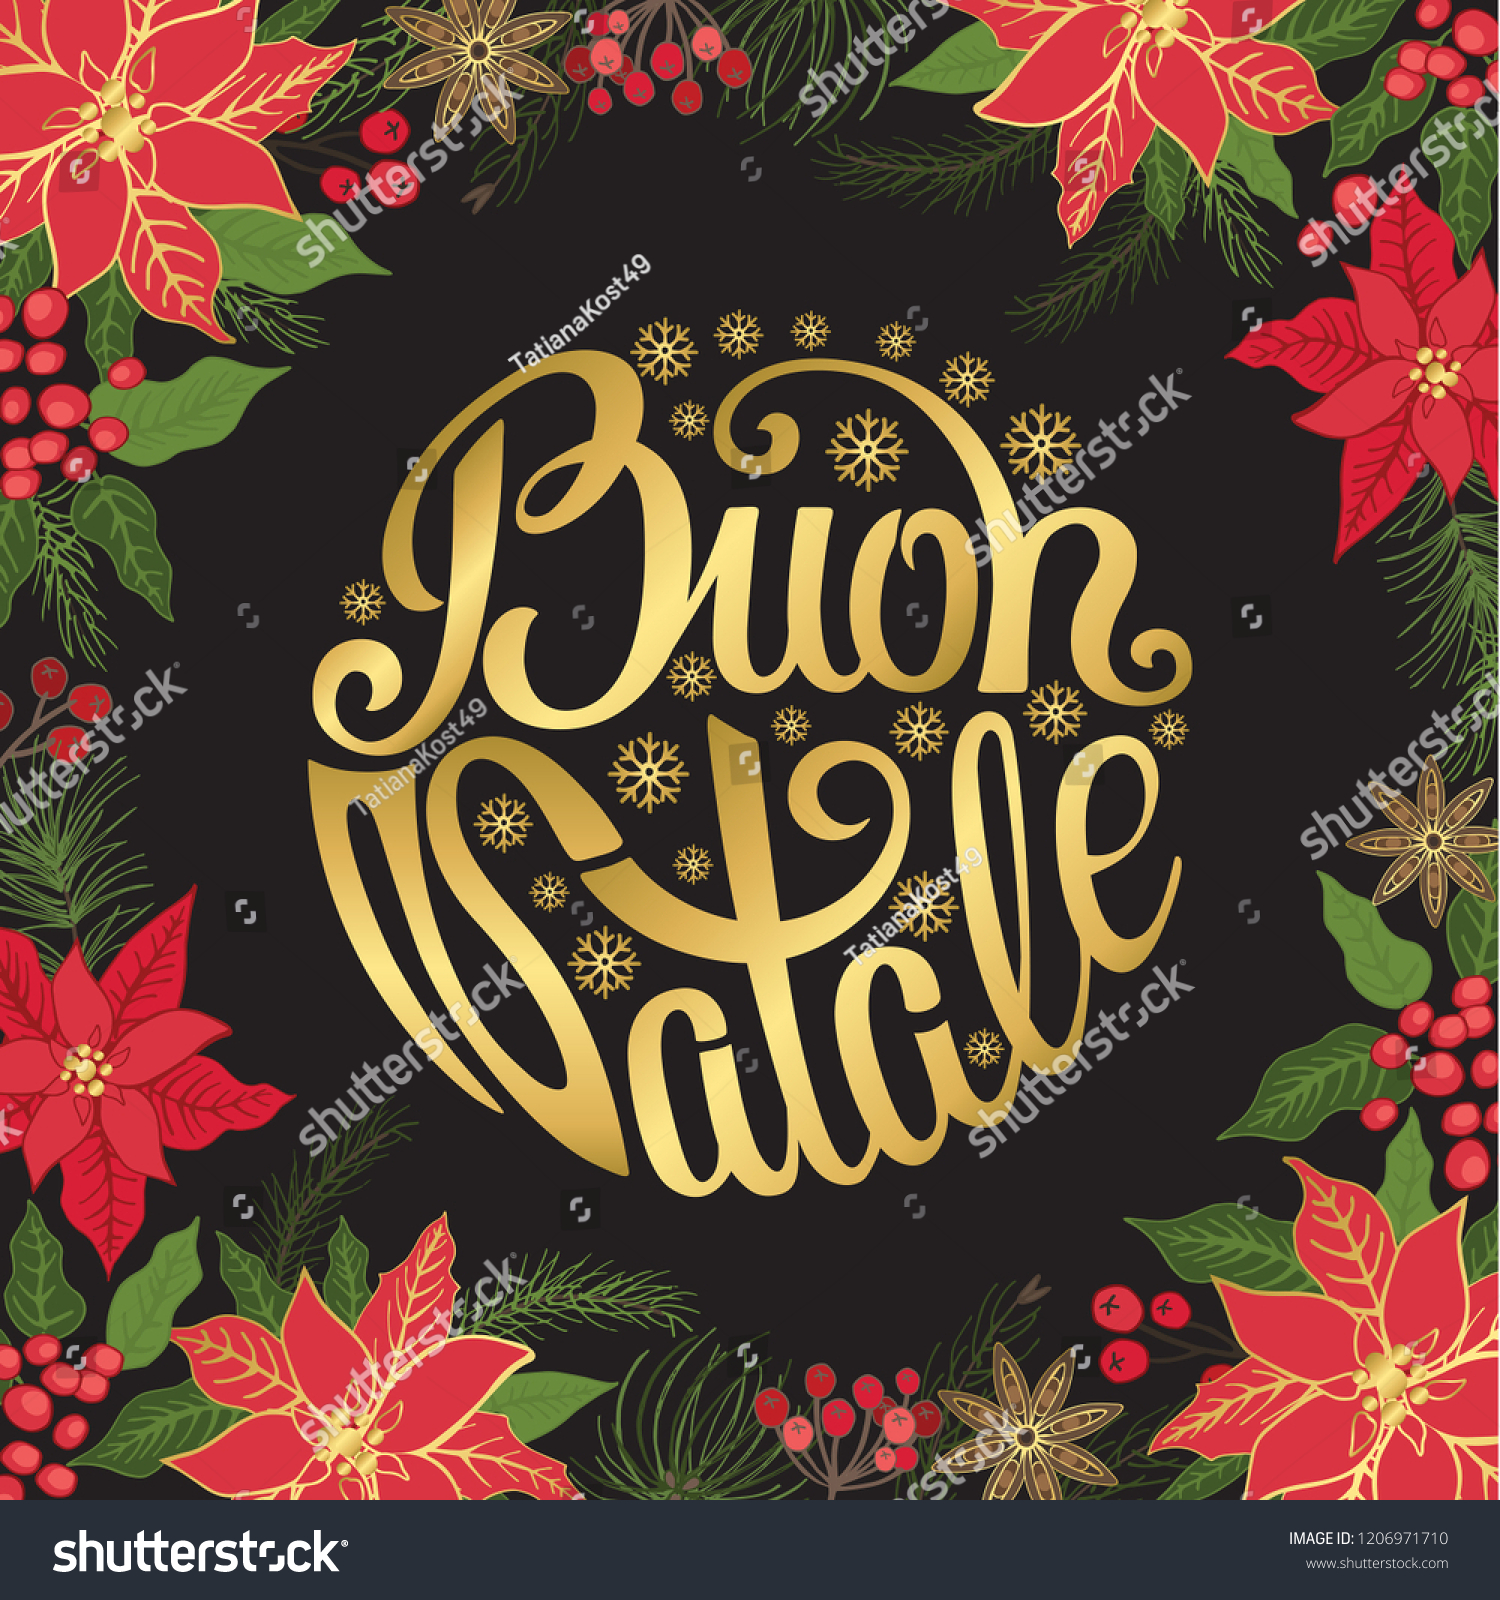 Buon Natale Outdoor Decorations.Christmas Buon Natale Invitationdesign Templateparty Flyerticket Stock Vector Royalty Free 1206971710